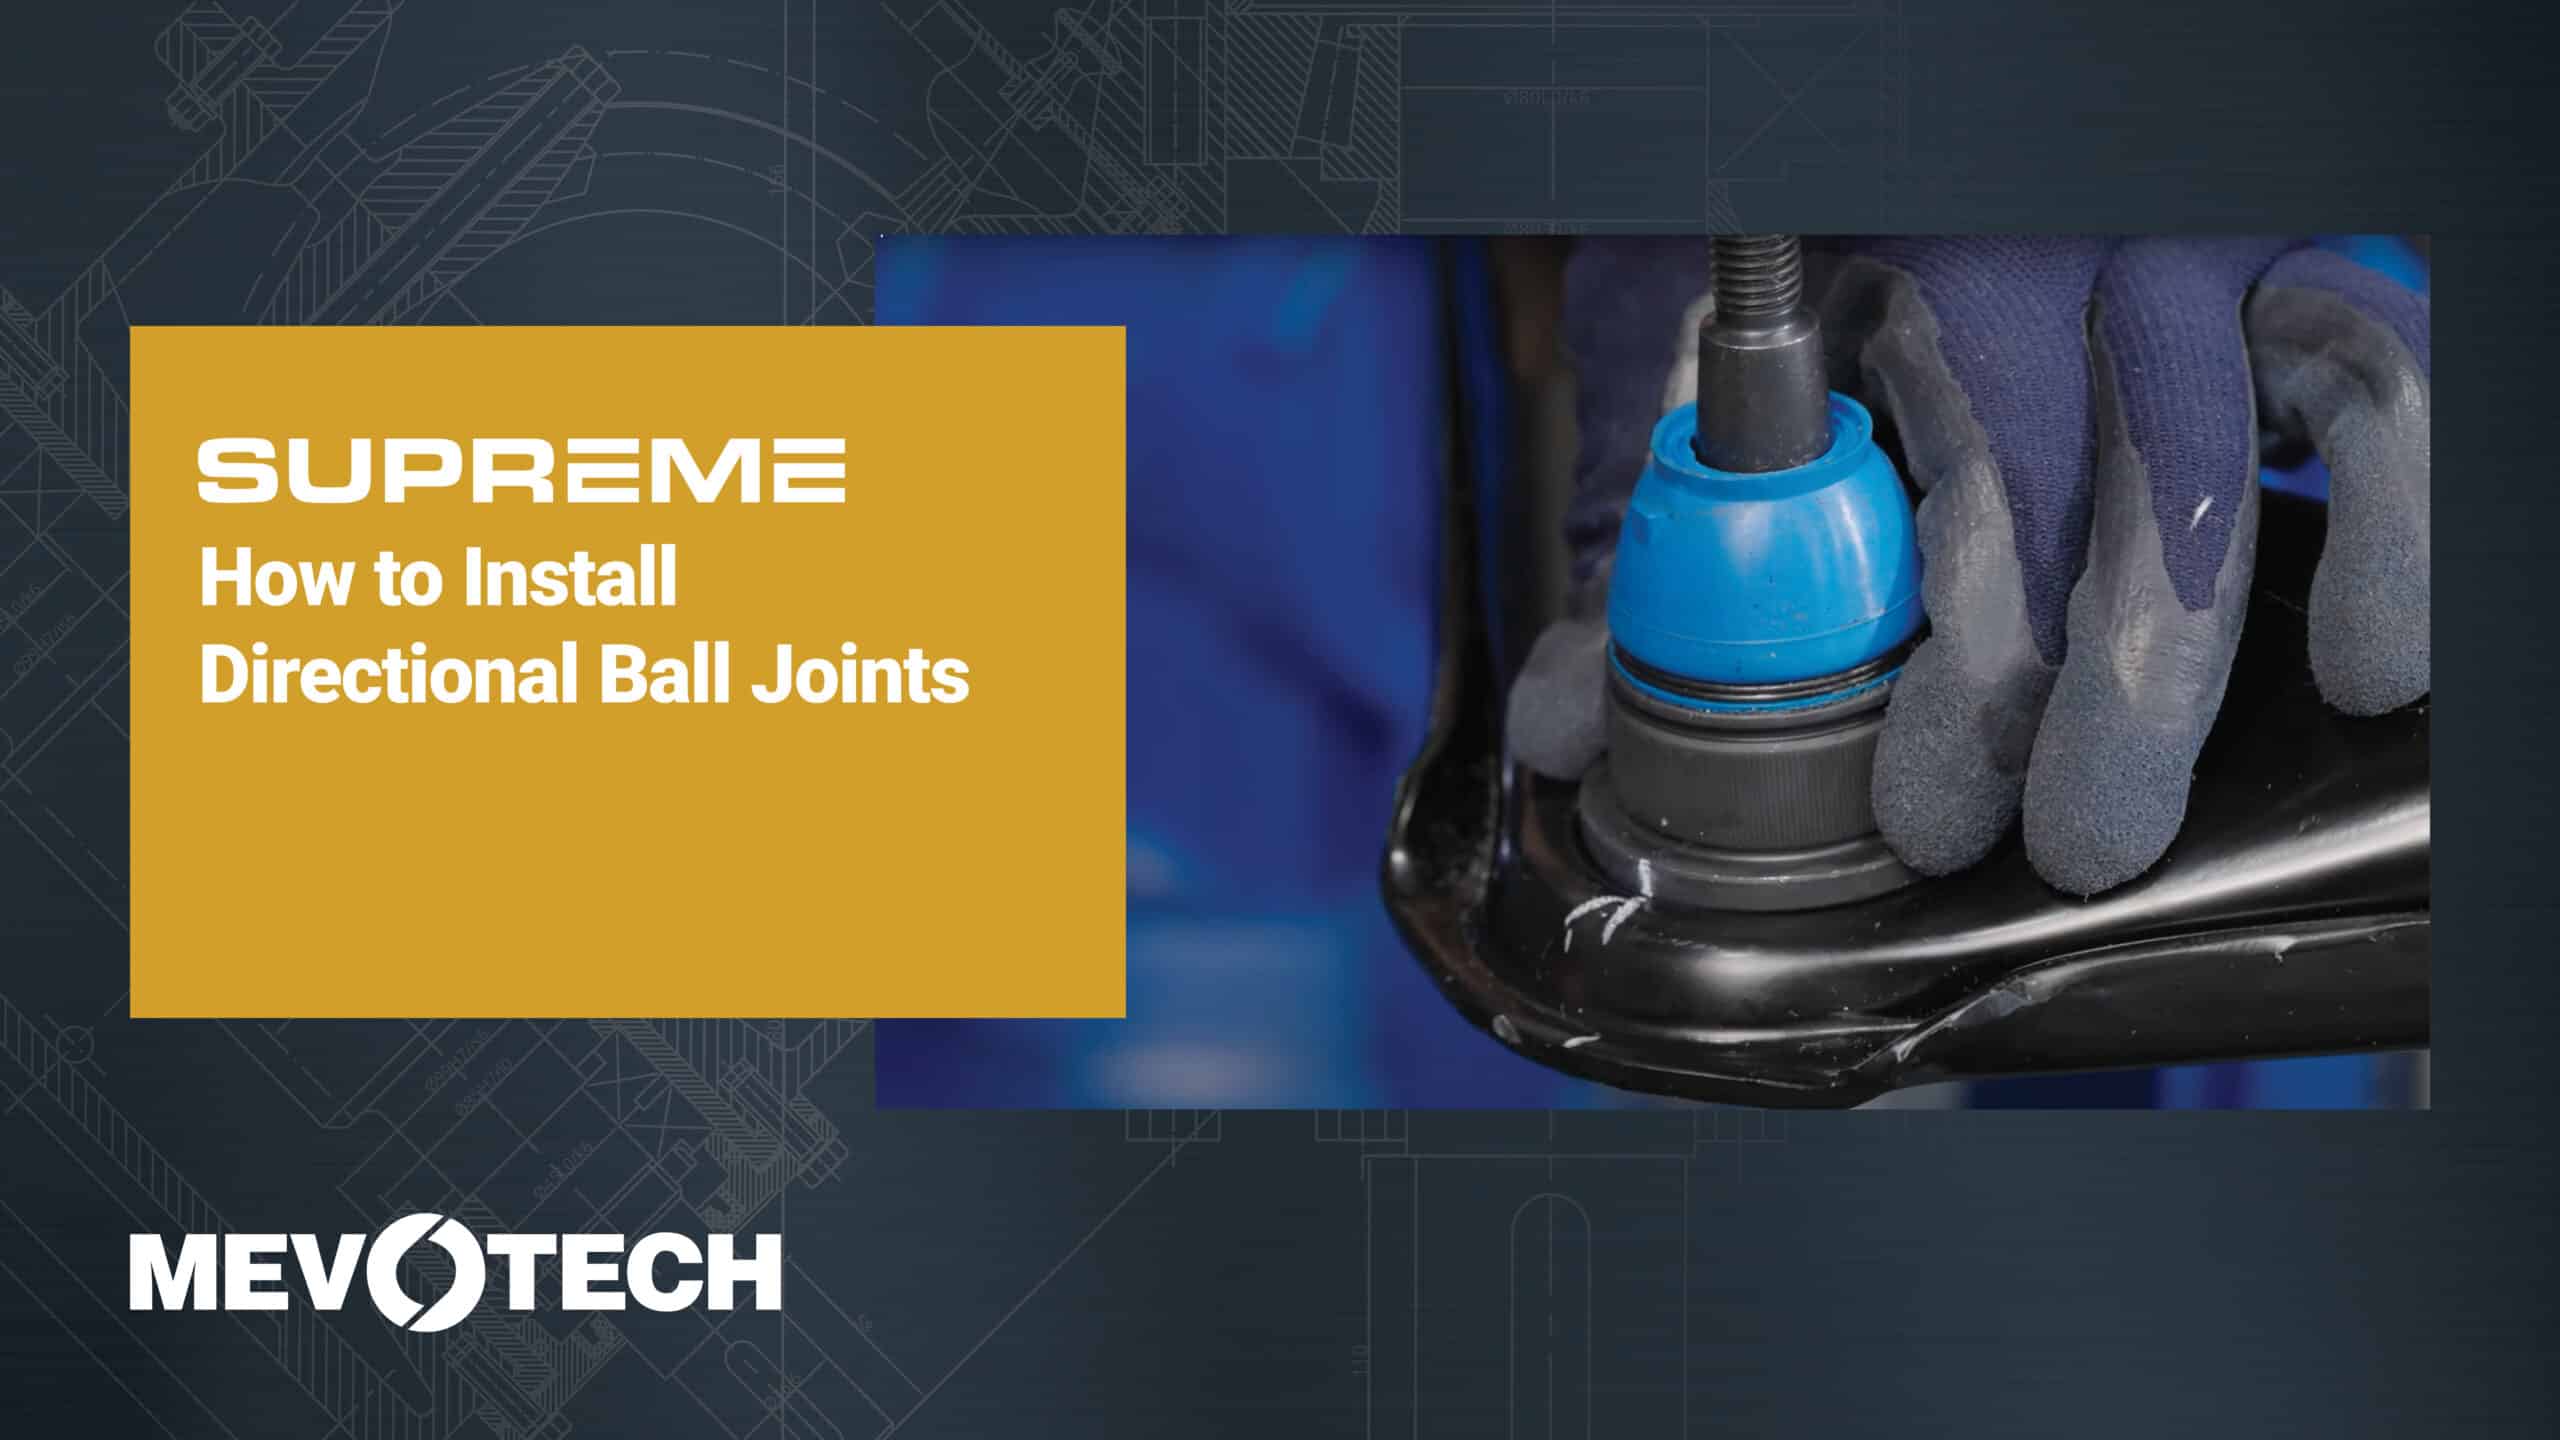 How To Install Supreme Directional Ball Joints